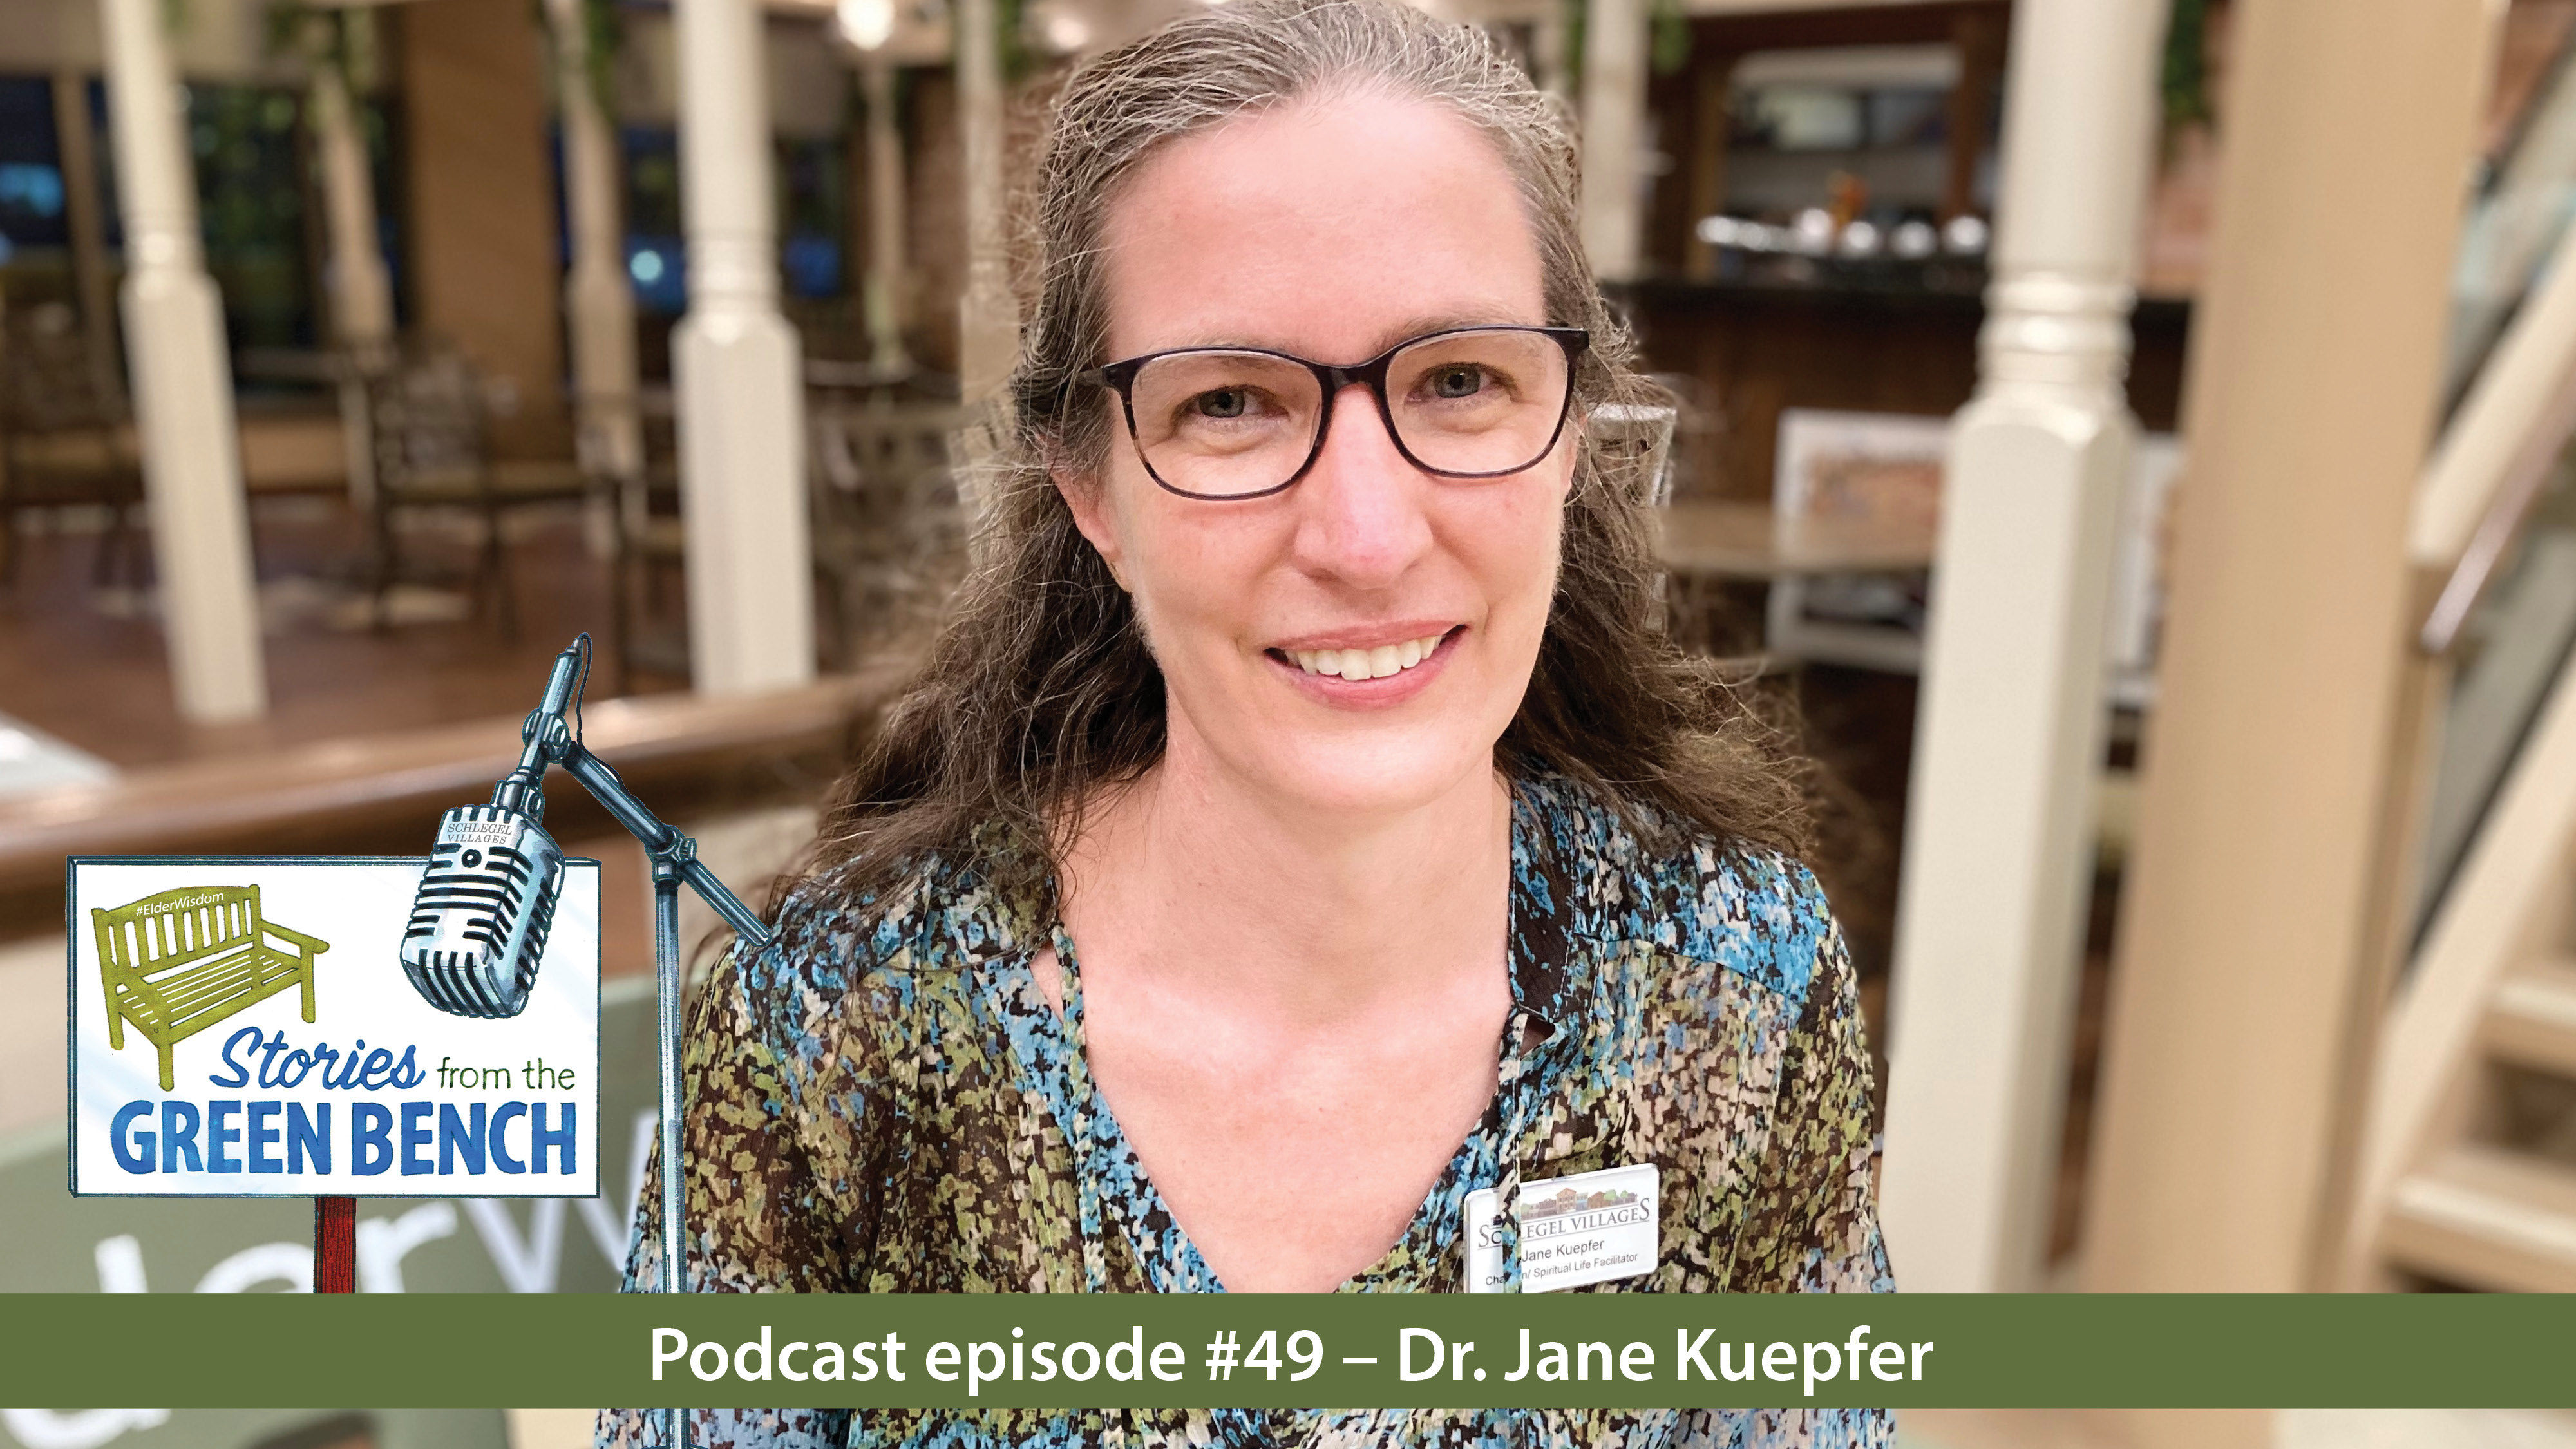 Dr. Jane Kuepfer on how spirituality in LTC & Retirement homes can build community